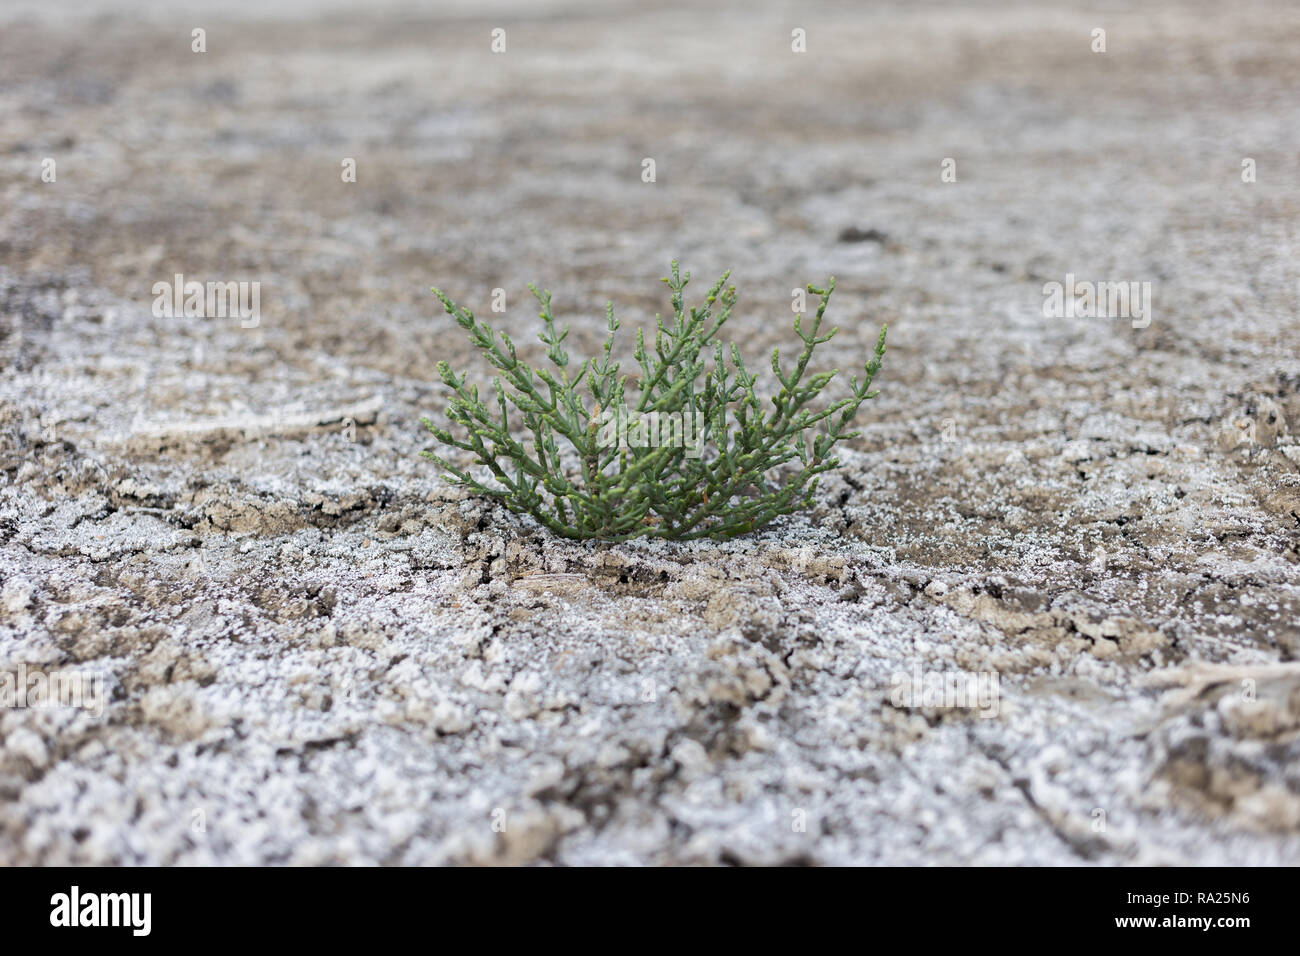 Salicornia plant that grows in salt marshes on beaches is tasty and healthy food. Stock Photo